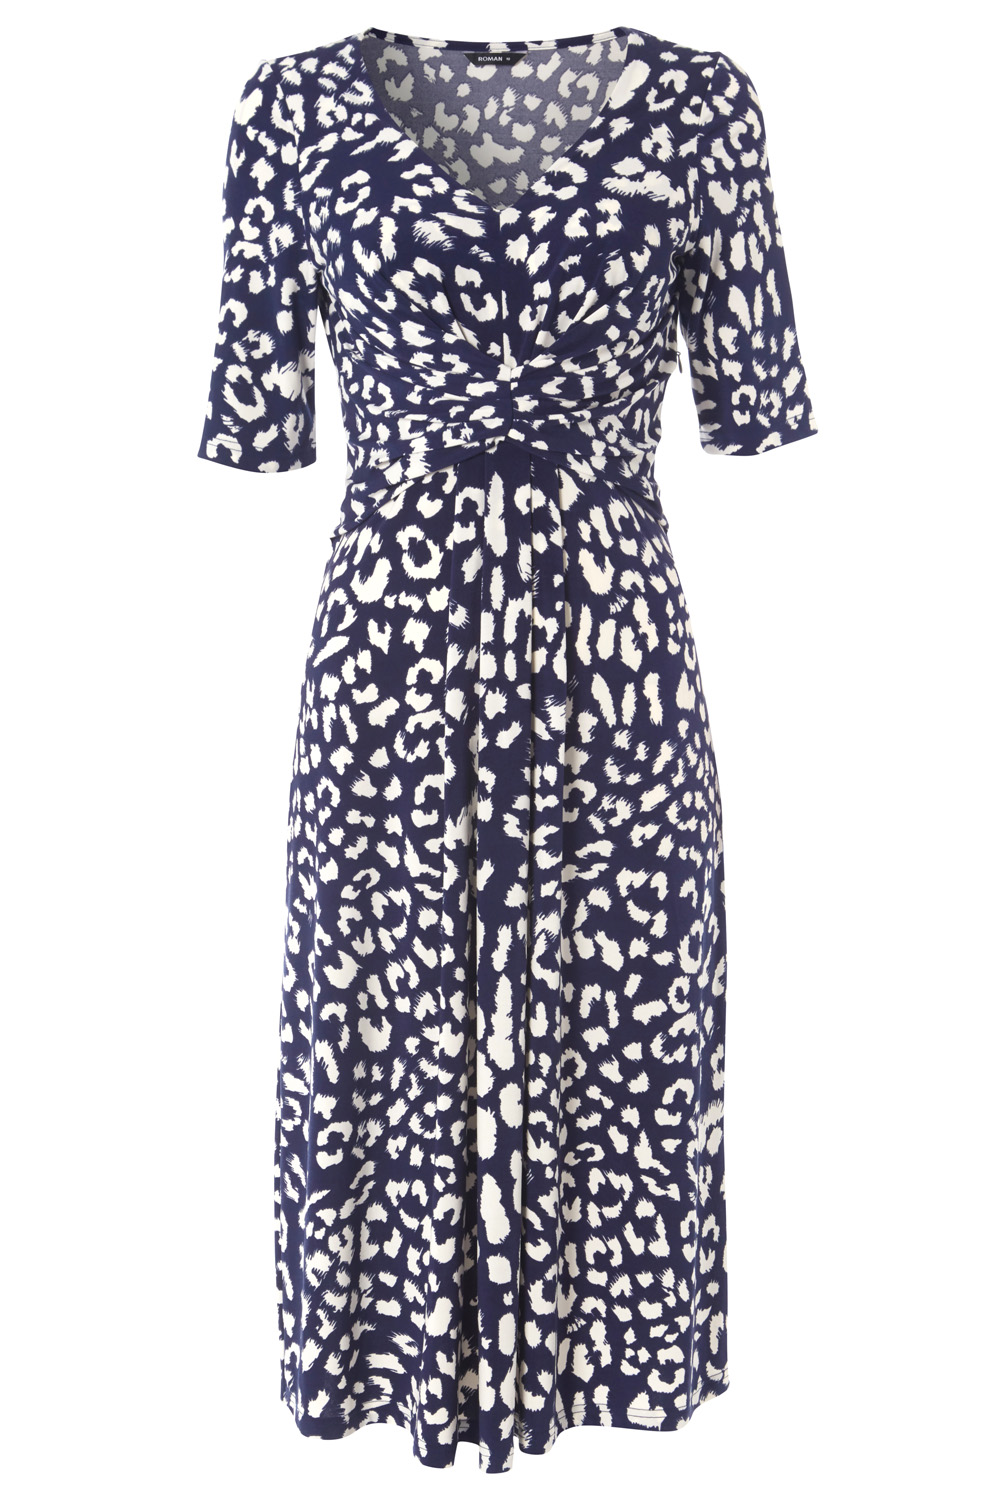 Navy  Leopard Print Ruched Fit And Flare Dress, Image 5 of 5